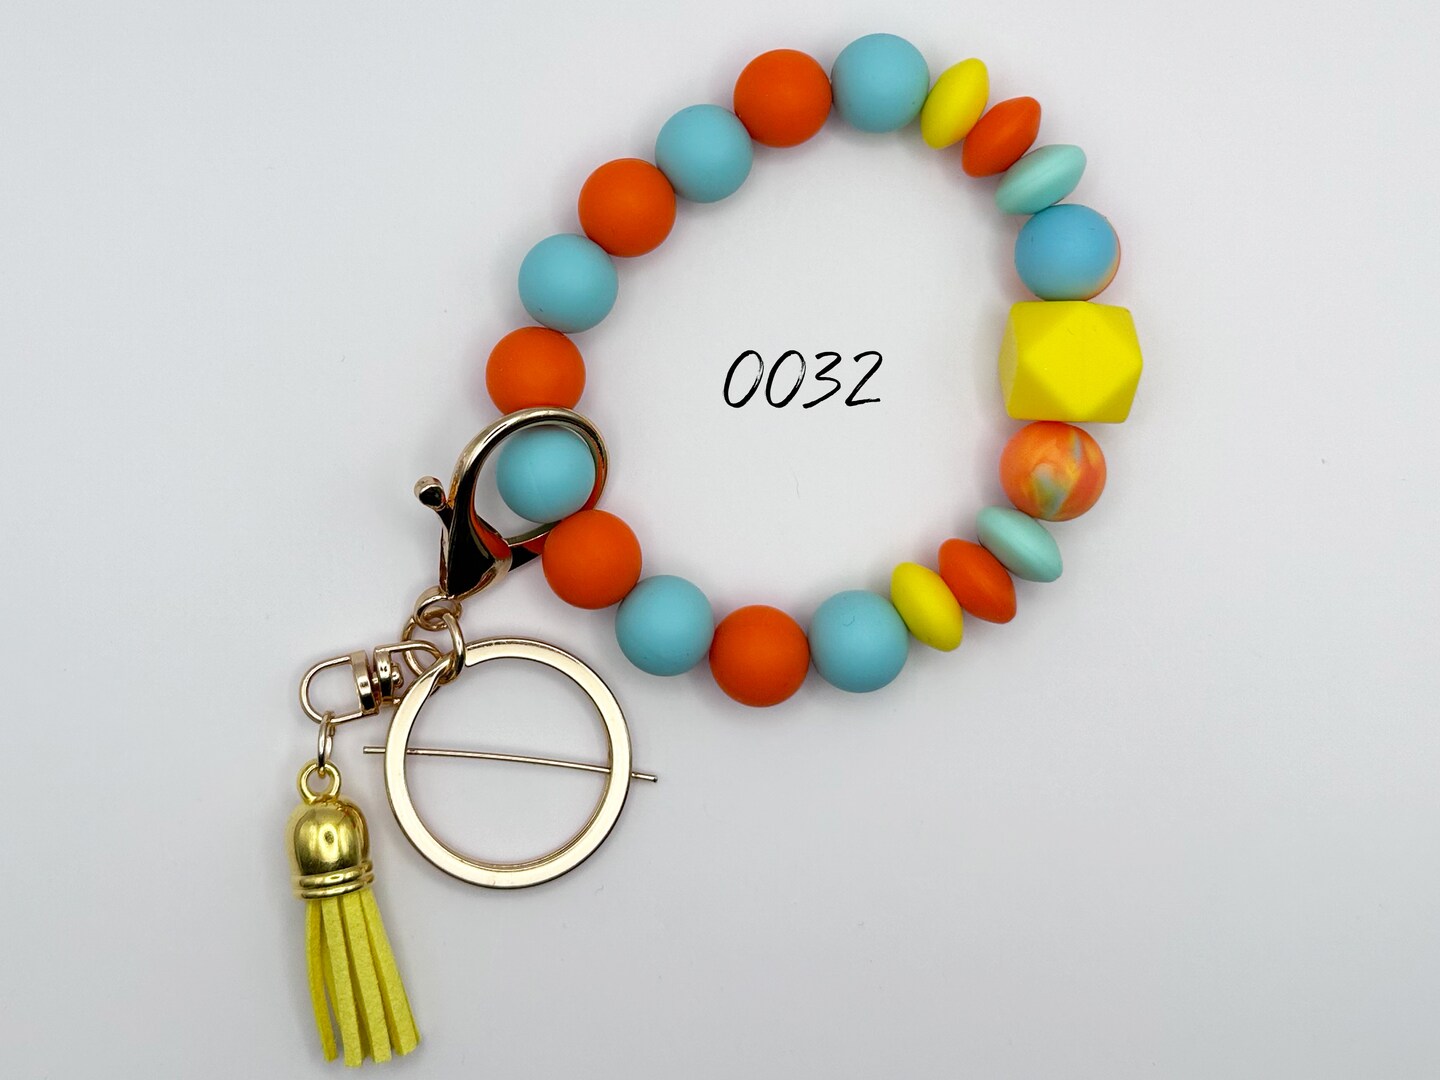 Bangle Keychain Wristlet - Silicone Beaded Bracelet – Trending Tassels,  Lobster Clasp and Key Ring - Orange Creamsicle Dreams